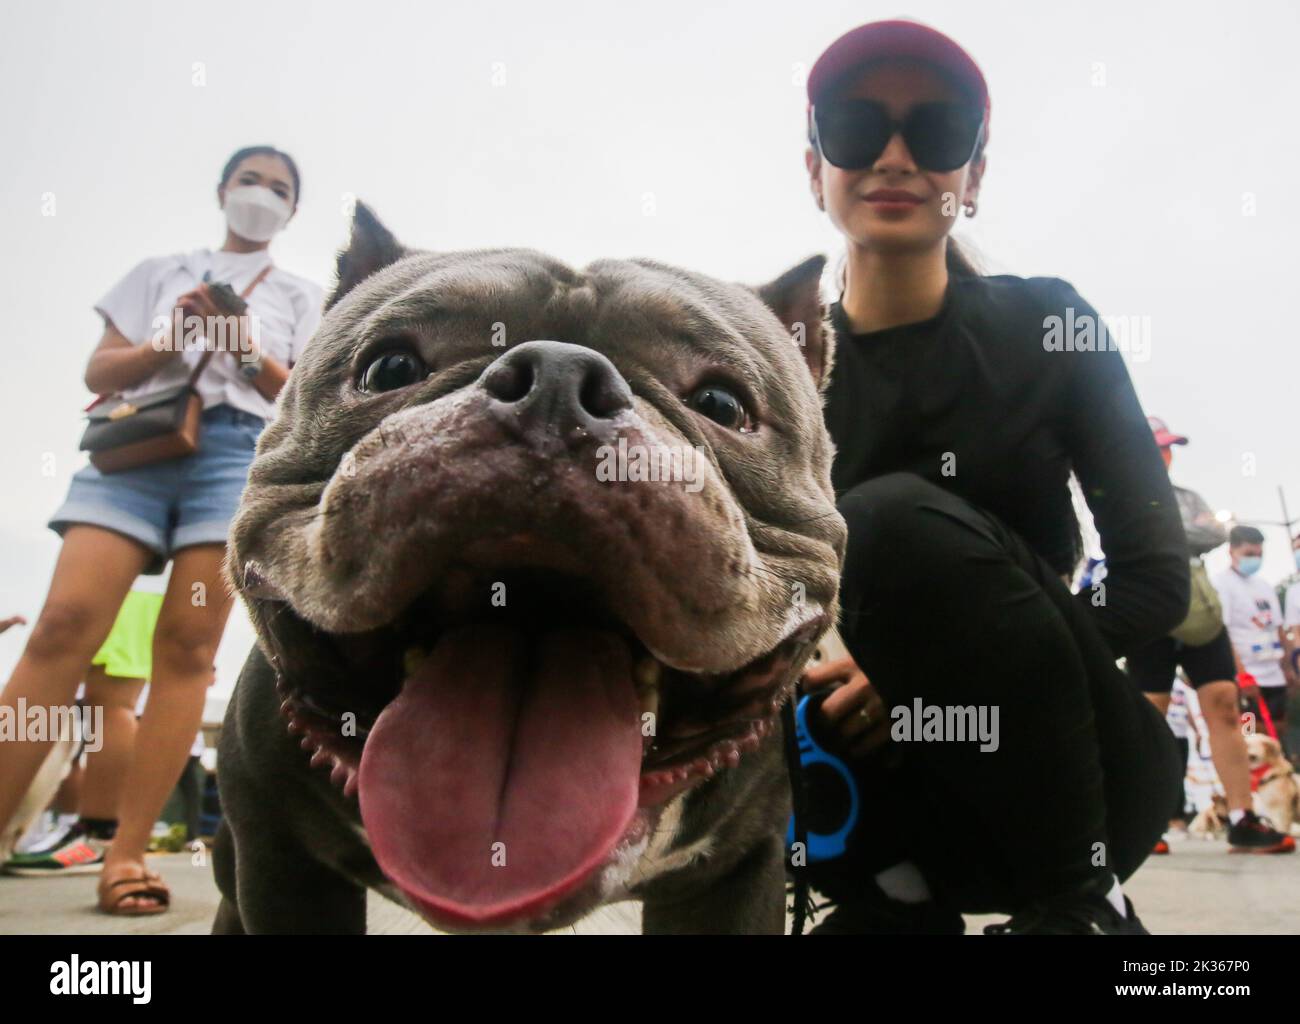 Pasig City, Philippines. 25th Sep, 2022. A woman is seen with her pet dog during the 'Run Fur Life' marathon in Pasig City, the Philippines, Sept. 25, 2022. The 'Run Fur Life' is a fundraising event for the benefit of maltreated, abandoned, and homeless dogs and also aims to promote animal welfare and responsible pet ownership. Credit: Rouelle Umali/Xinhua/Alamy Live News Stock Photo